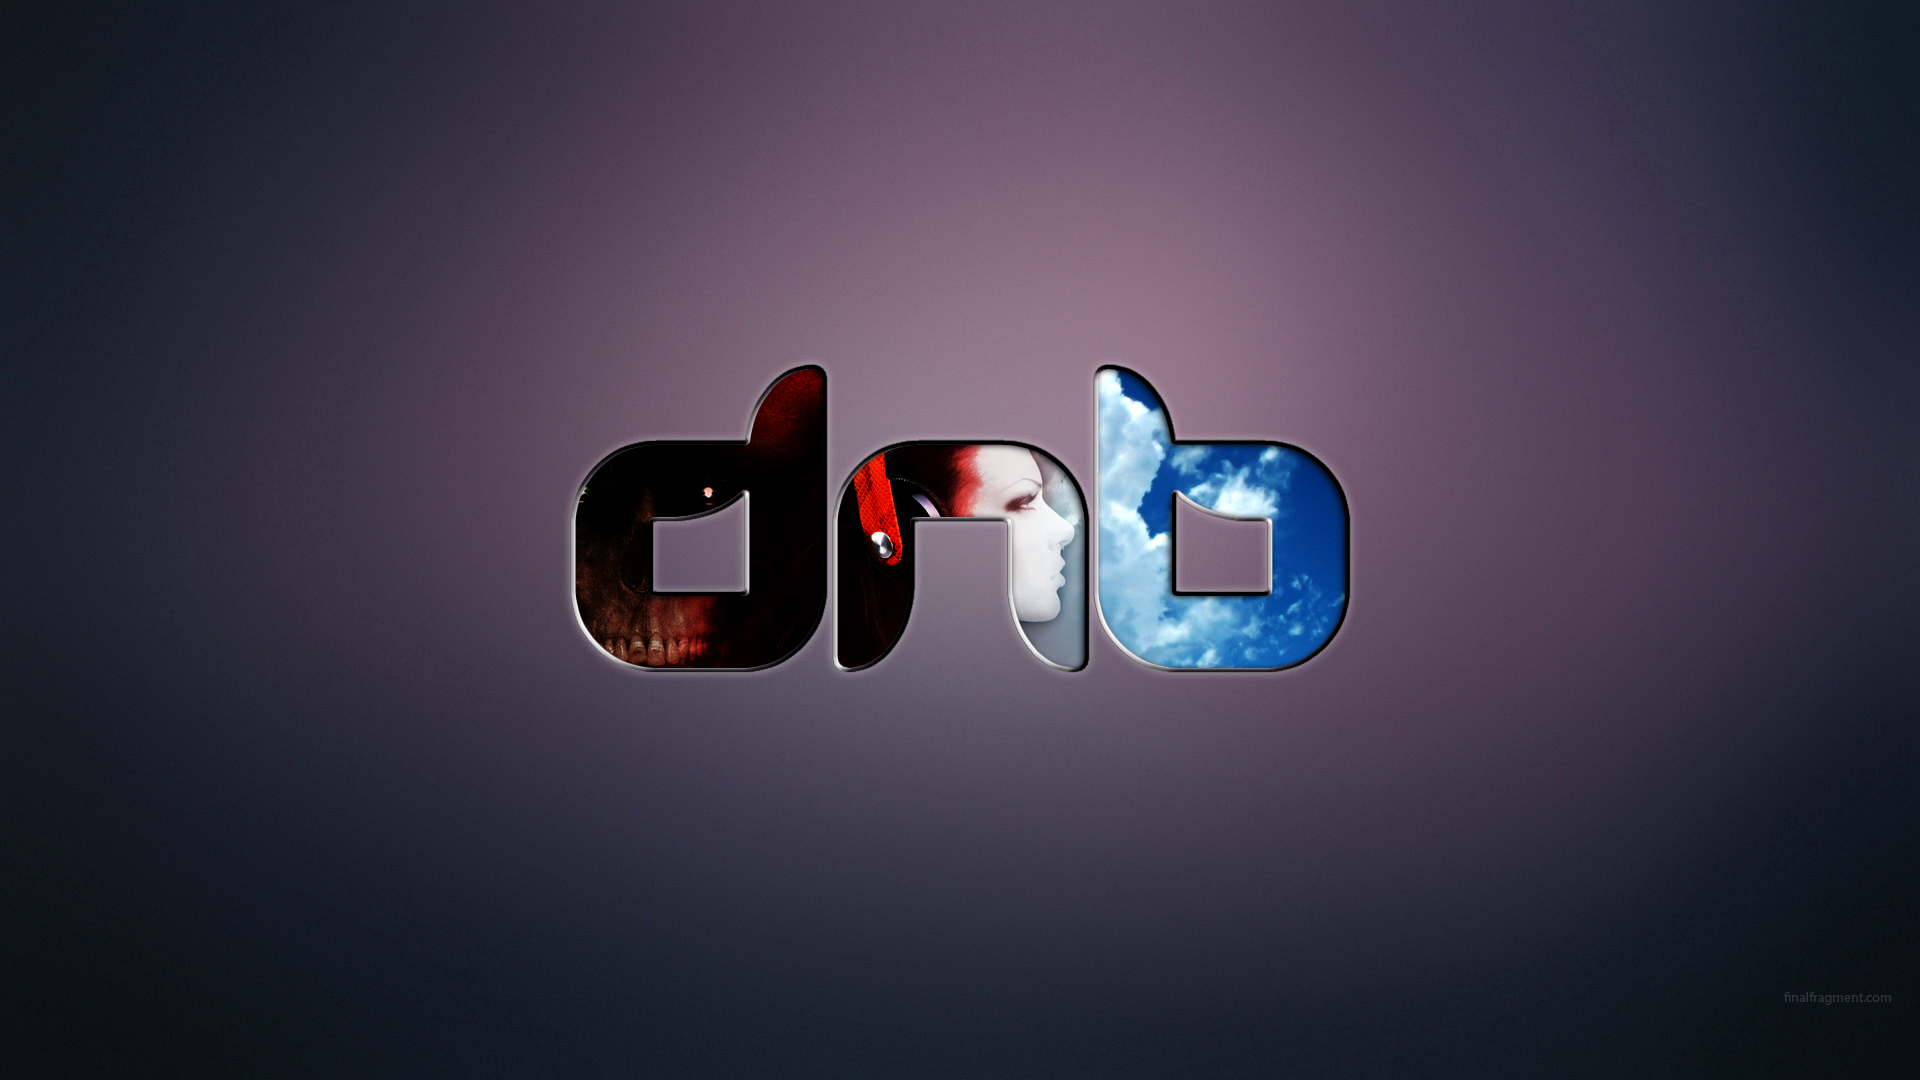 Drum N Bass Dnb Electronic And S Wallpaper